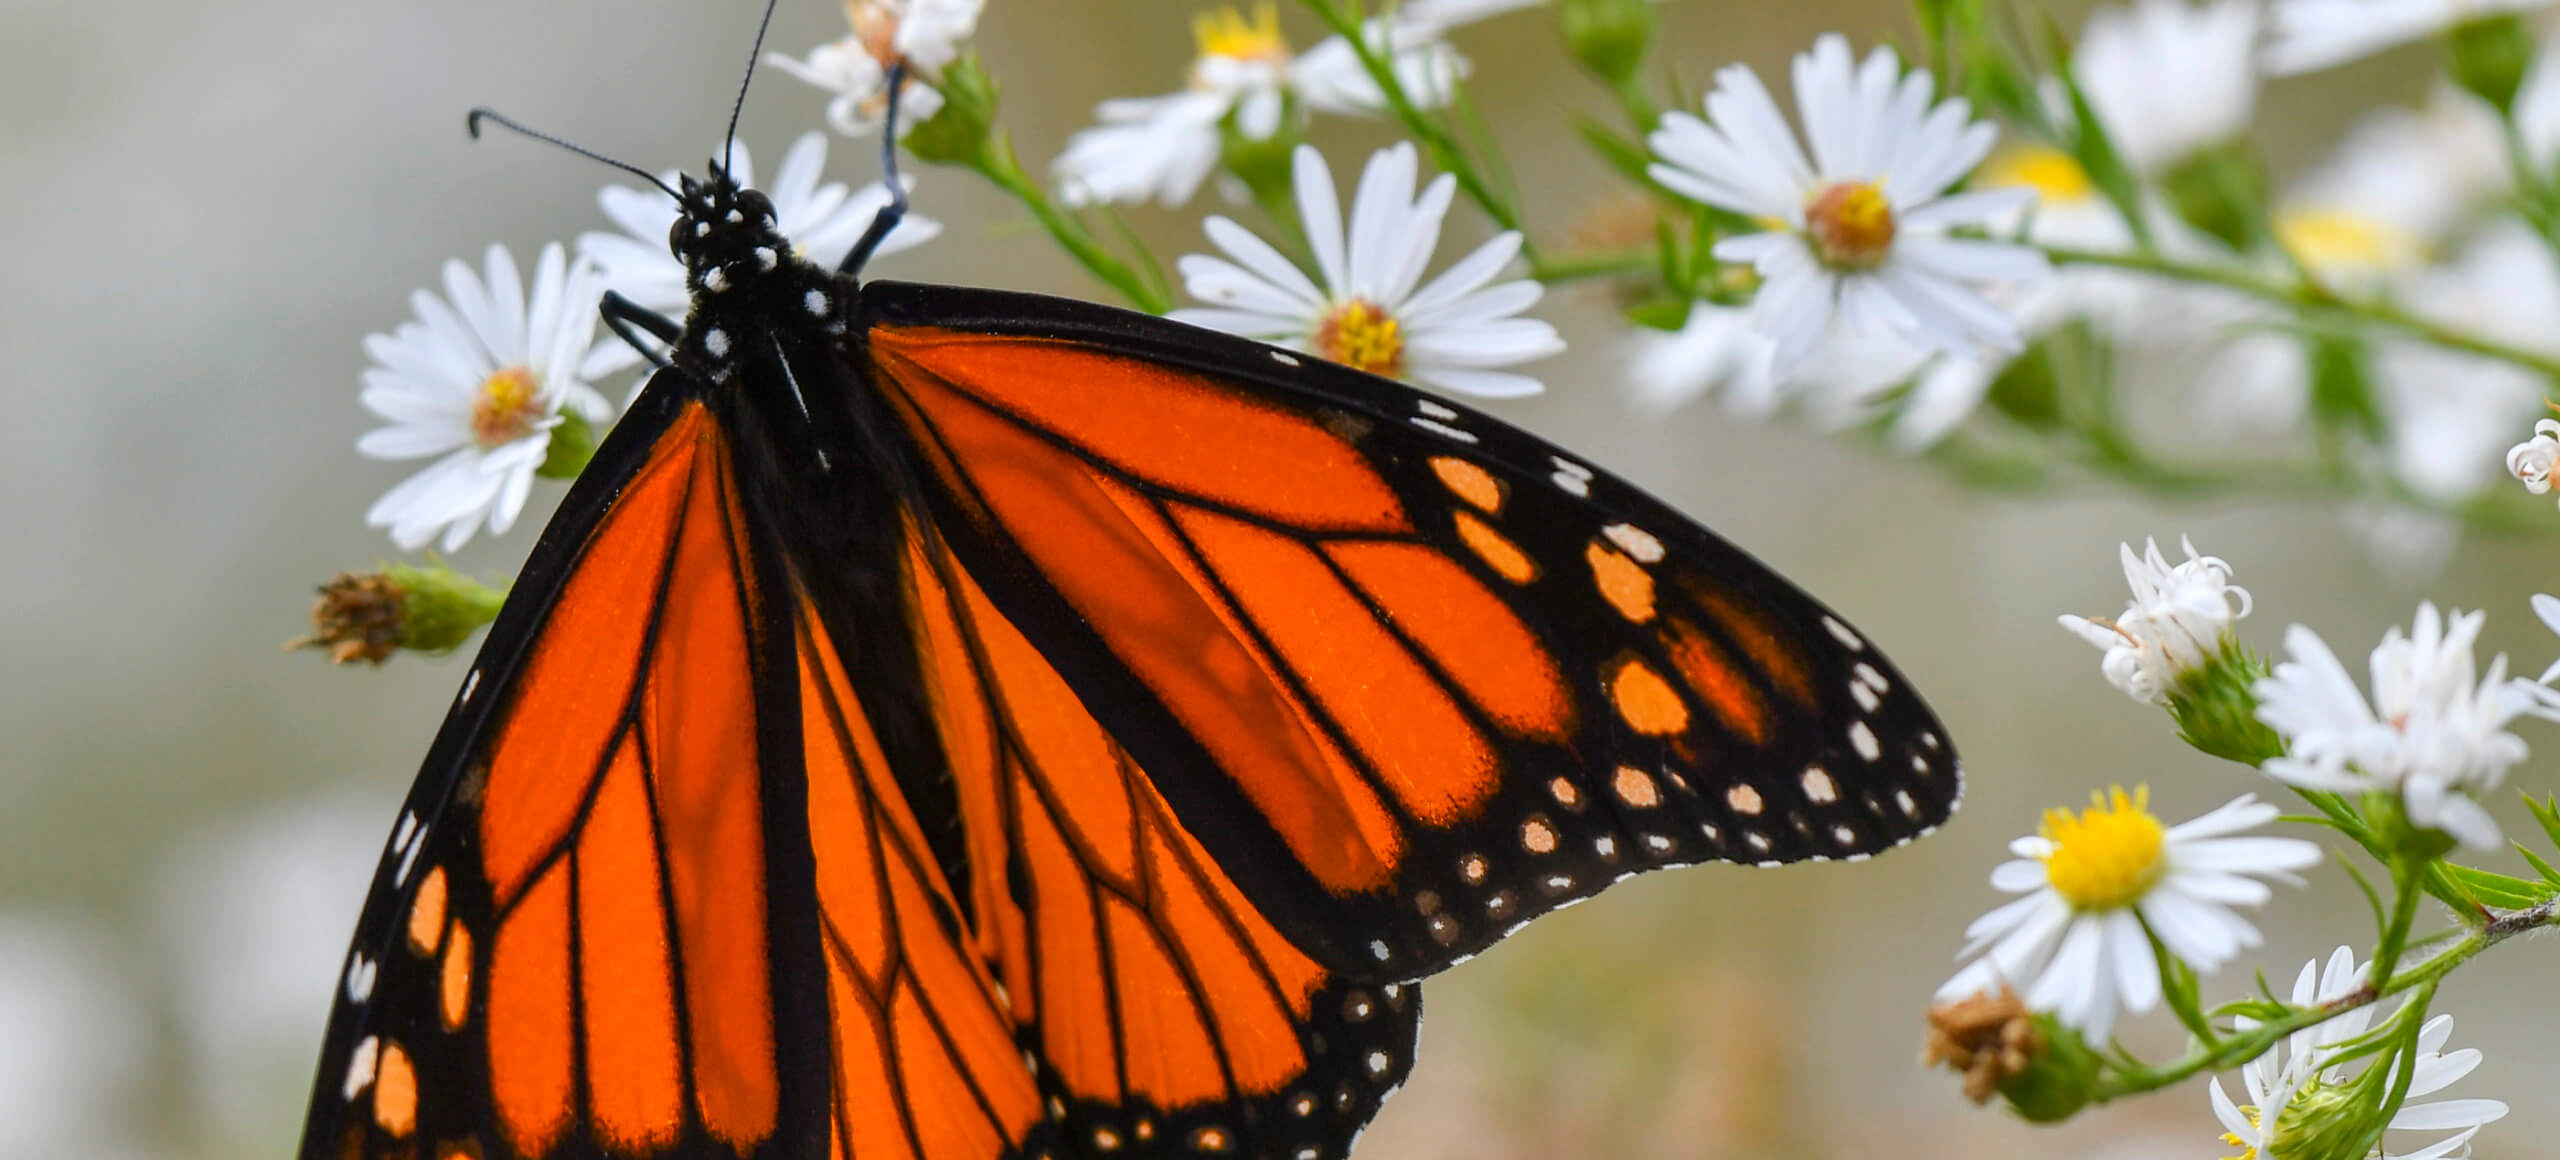 A monarch butterfly perches on white wildflowers.